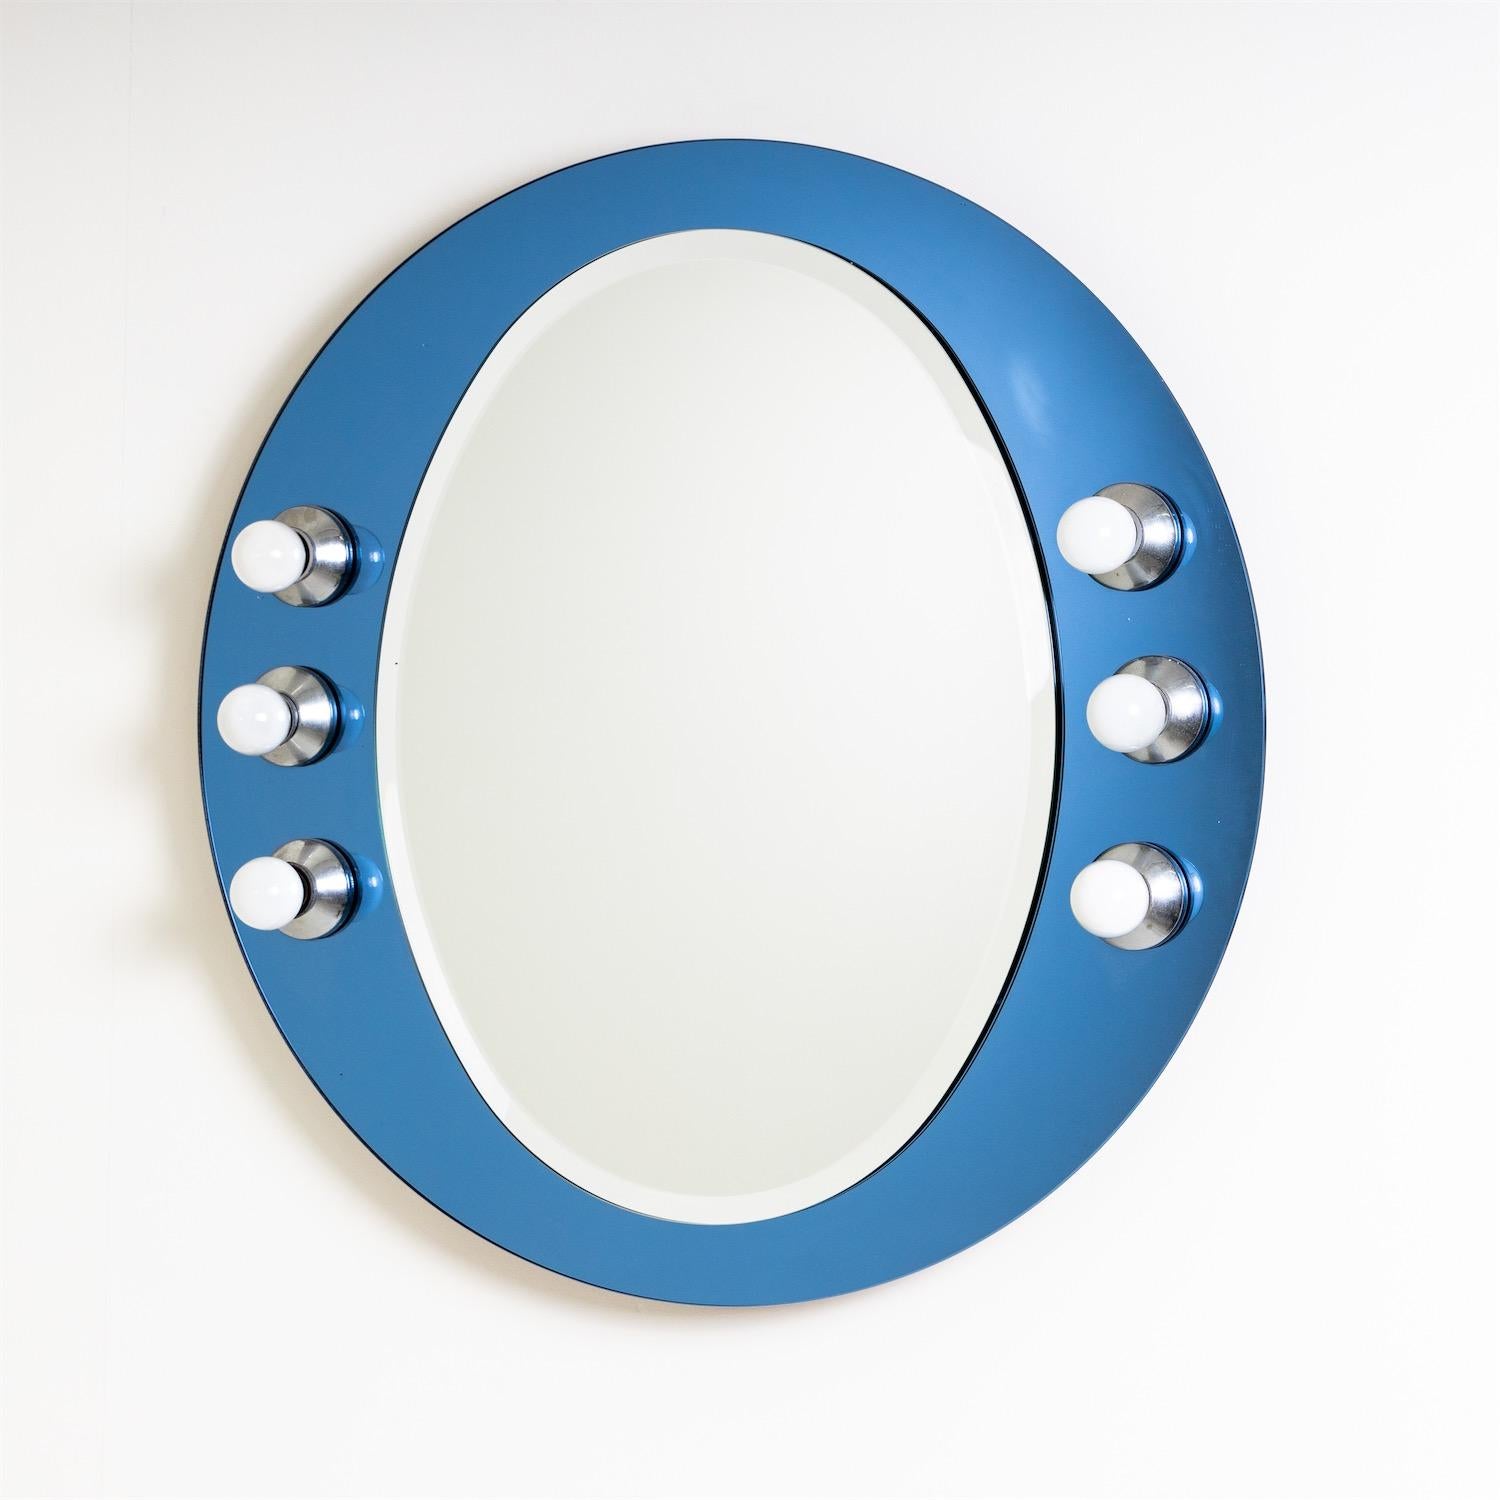 Round illuminated wall mirror of blue glass with six sockets.